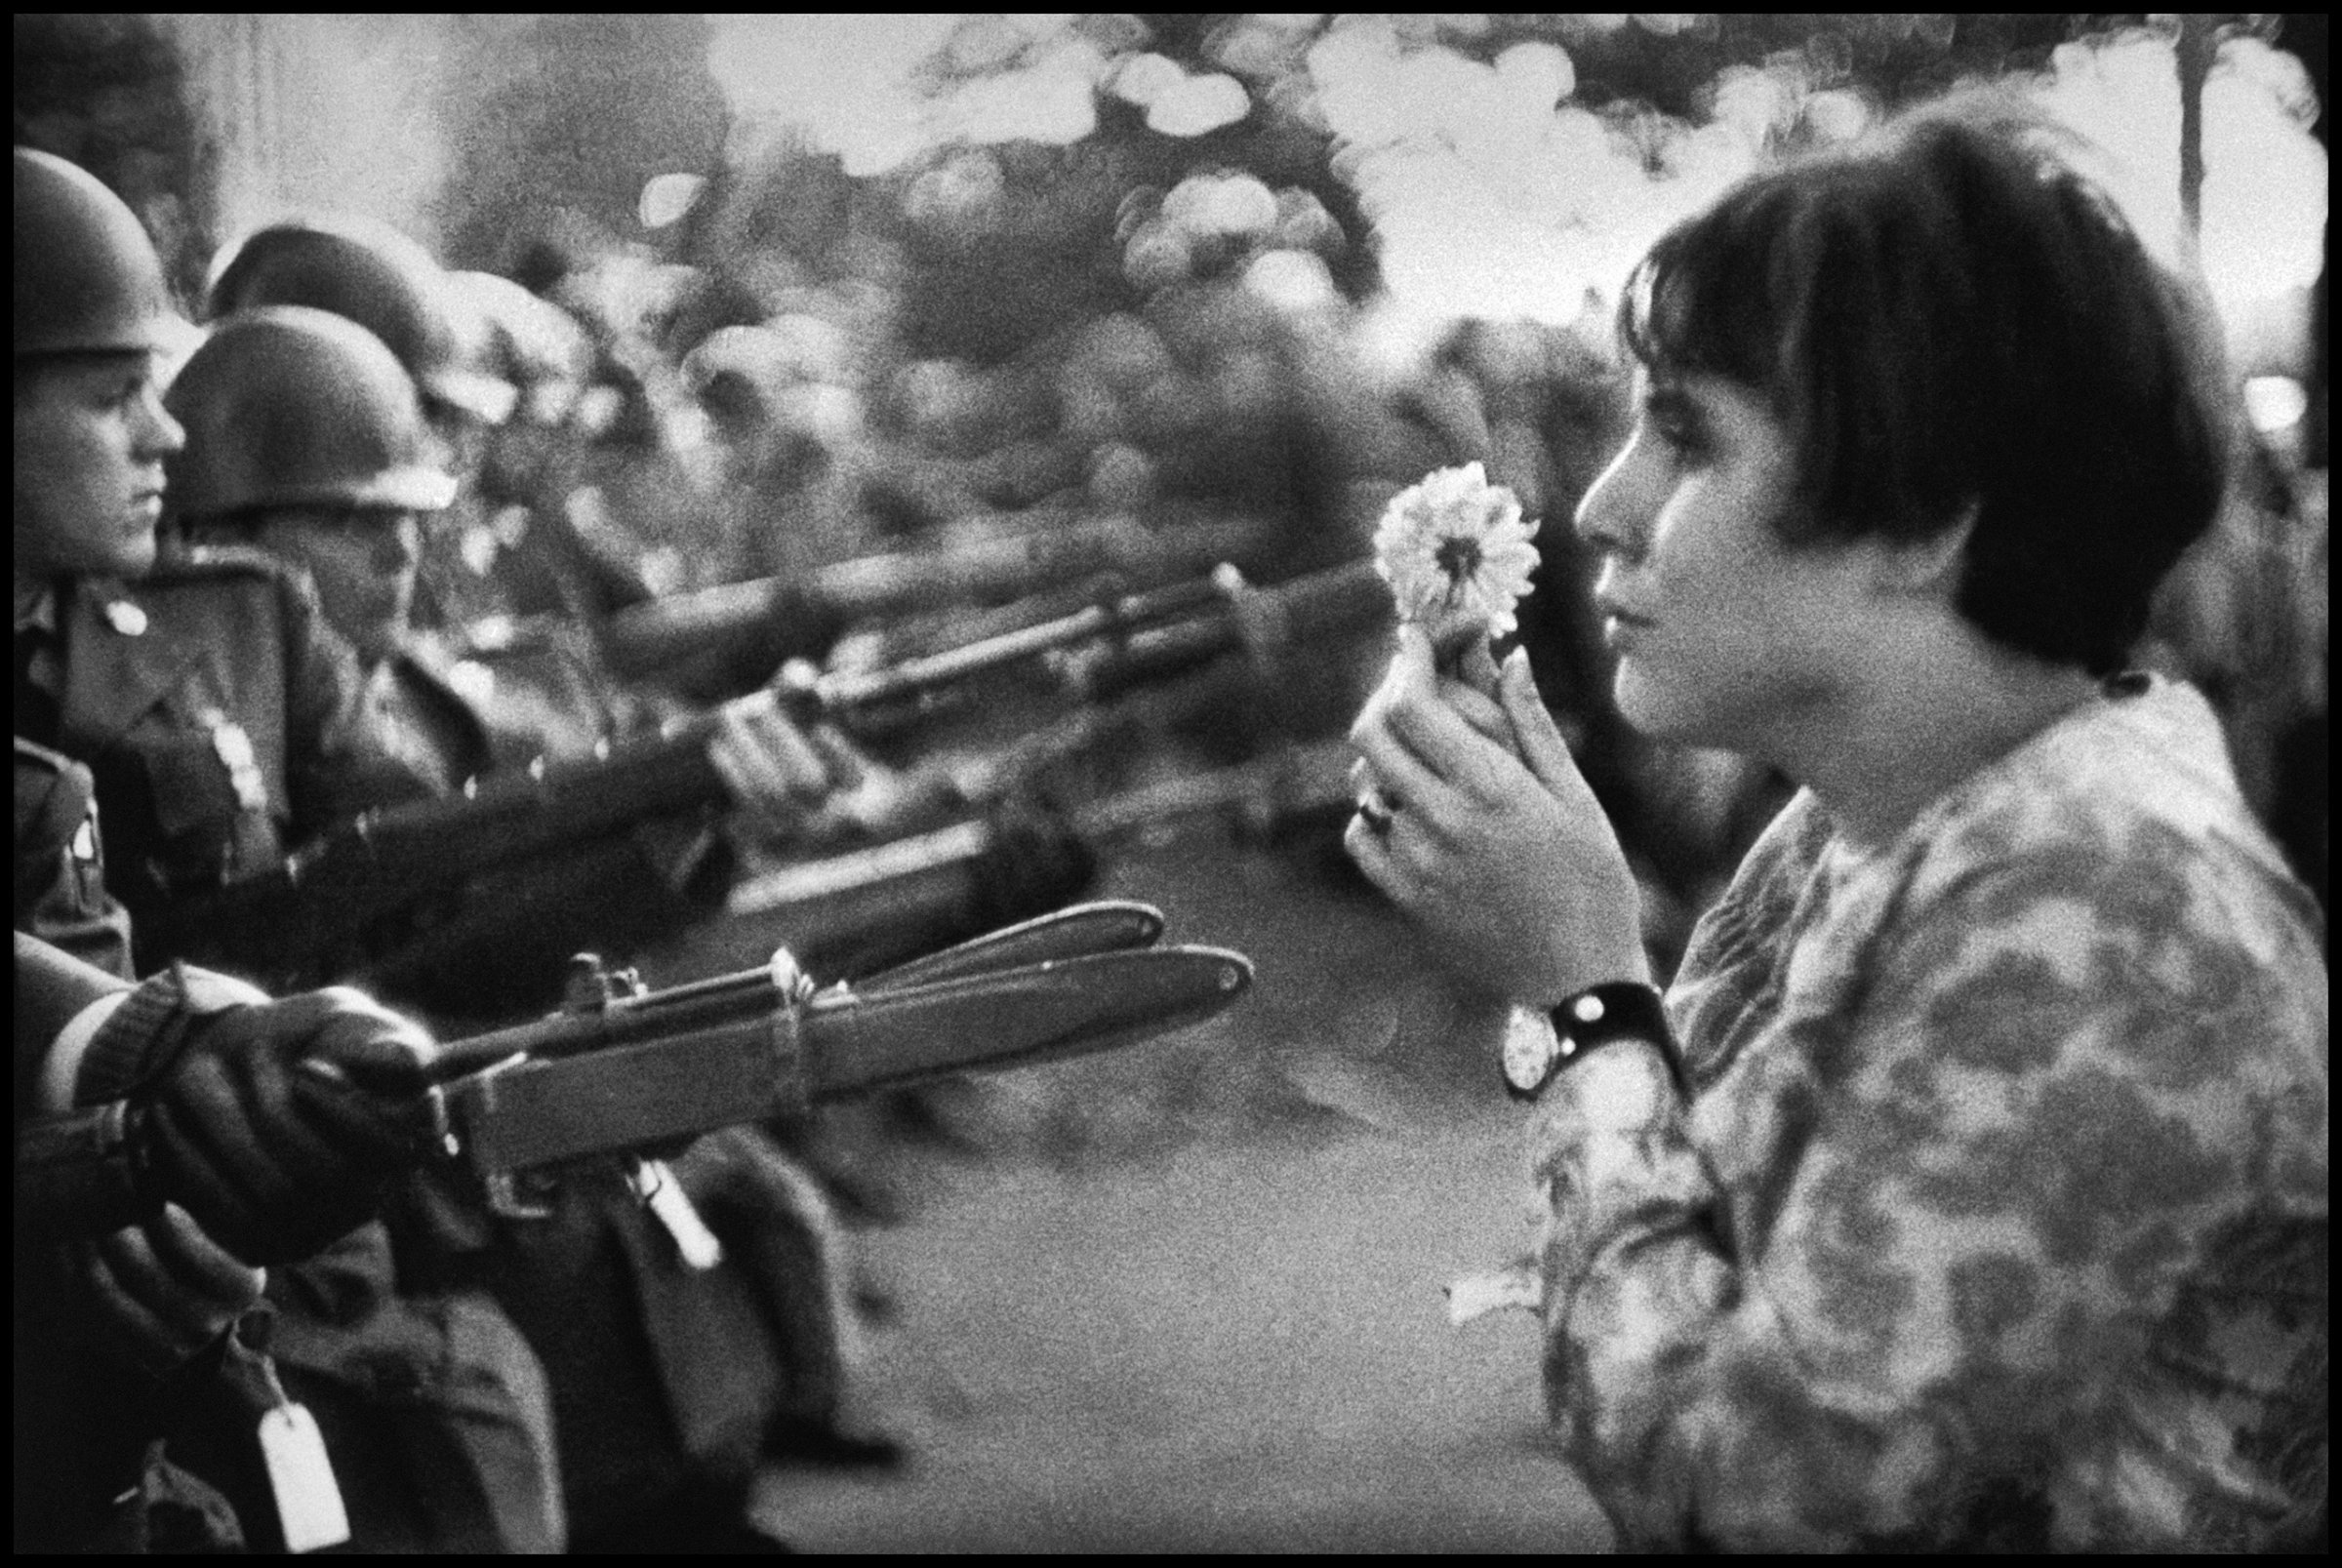 Jan Rose Kasmir, confronts the American National Guard outside the Pentagon during the 1967 anti-Vietnam march. This march helped to turn public opinion against the US war in Vietnam.